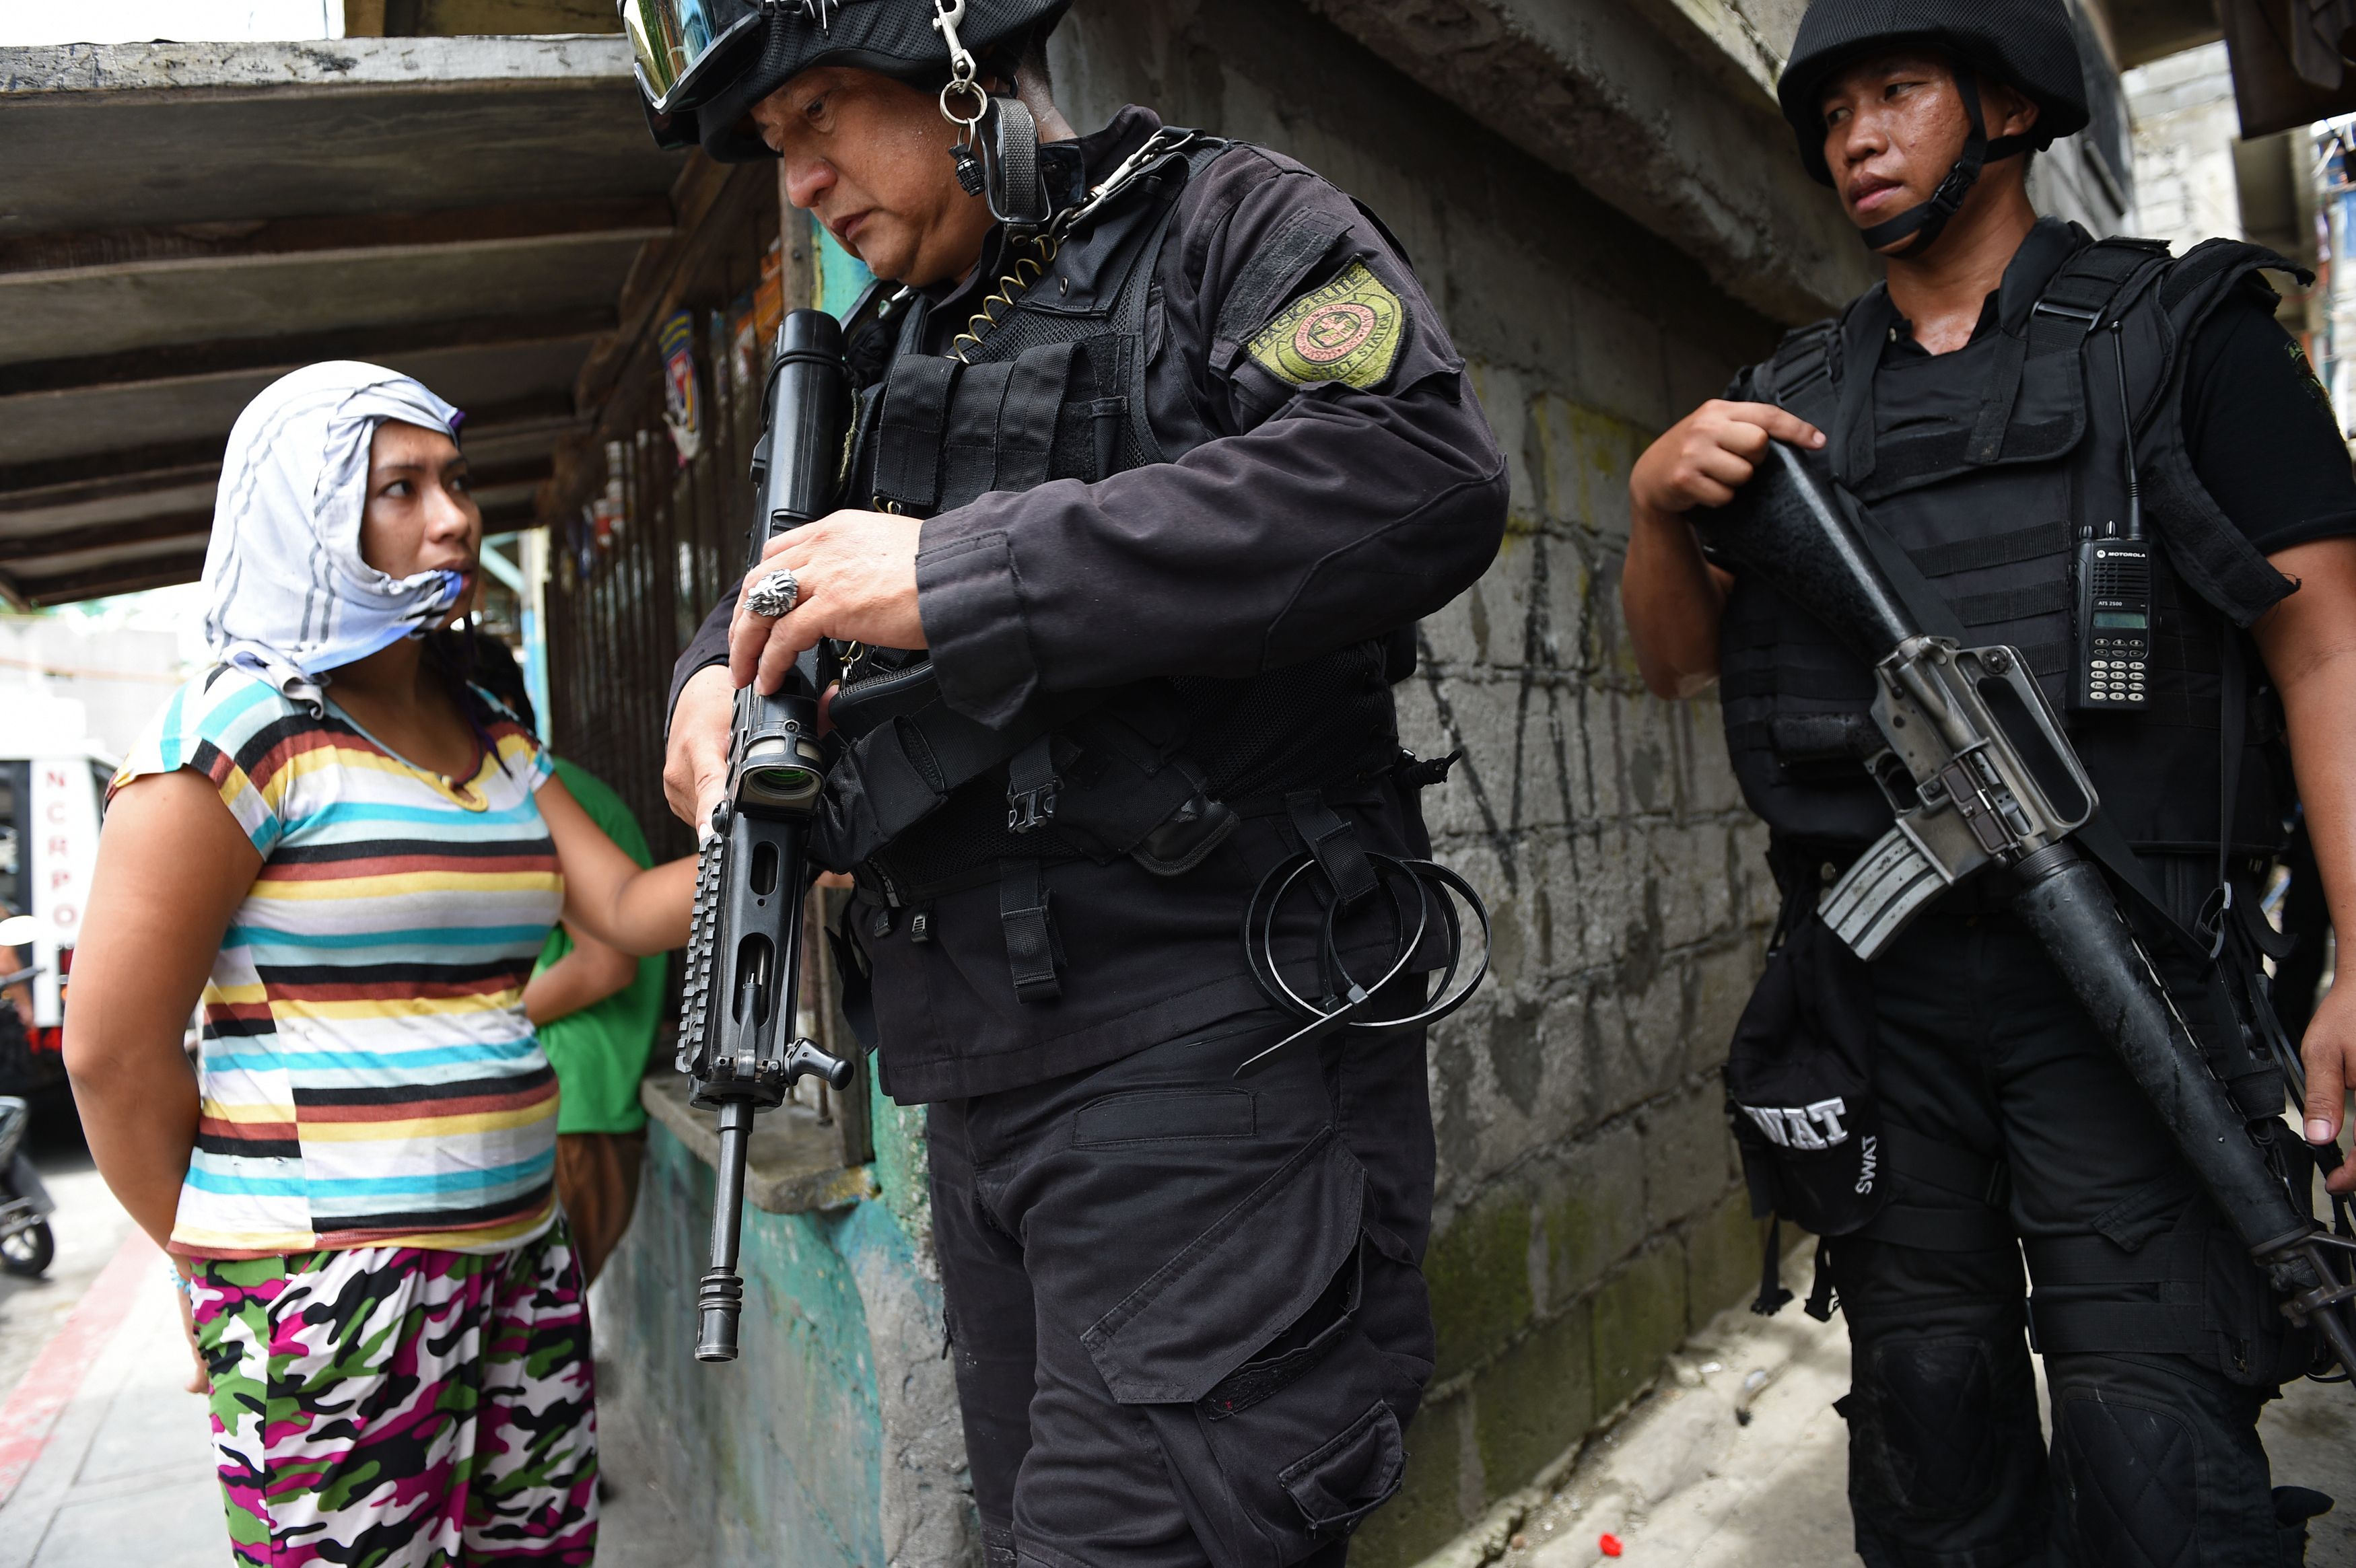 Police Special Weapons And Tactics (SWAT) personnel walk past a resident after an operation against illegal drugs in Pasig City, suburban Manila on September 5, 2016. (TED ALJIBE—AFP/Getty Images)